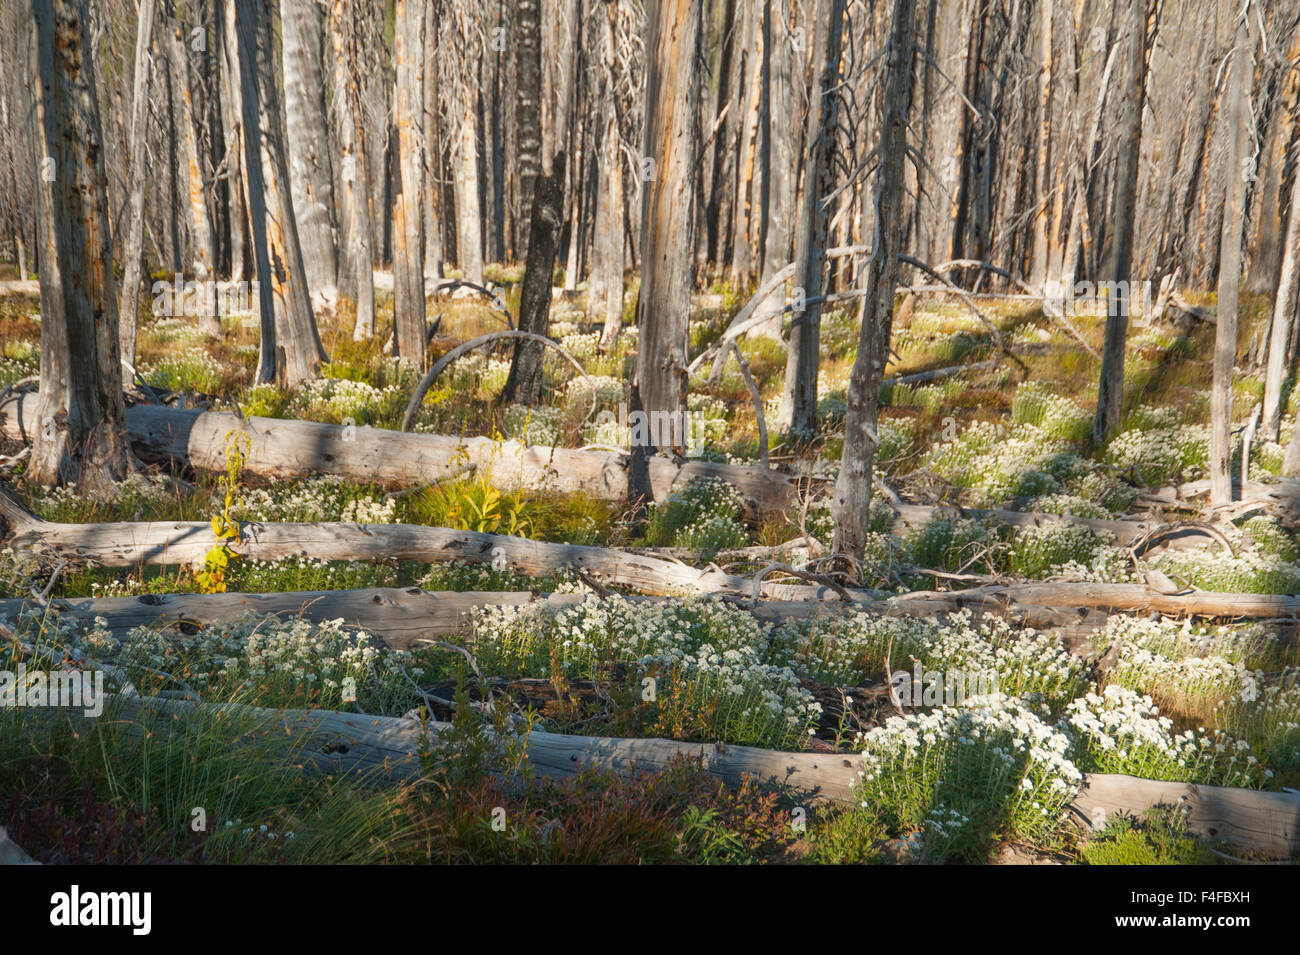 Washington, Pasayten Wilderness, Okanogan-Wenatchee National Forest, North Cascades National Park, Hart's Pass. Landscape of pearly everlasting (Anaphalis margaritacea) wildflowers blooming amid dead trees burned out from a previous fire. Stock Photo